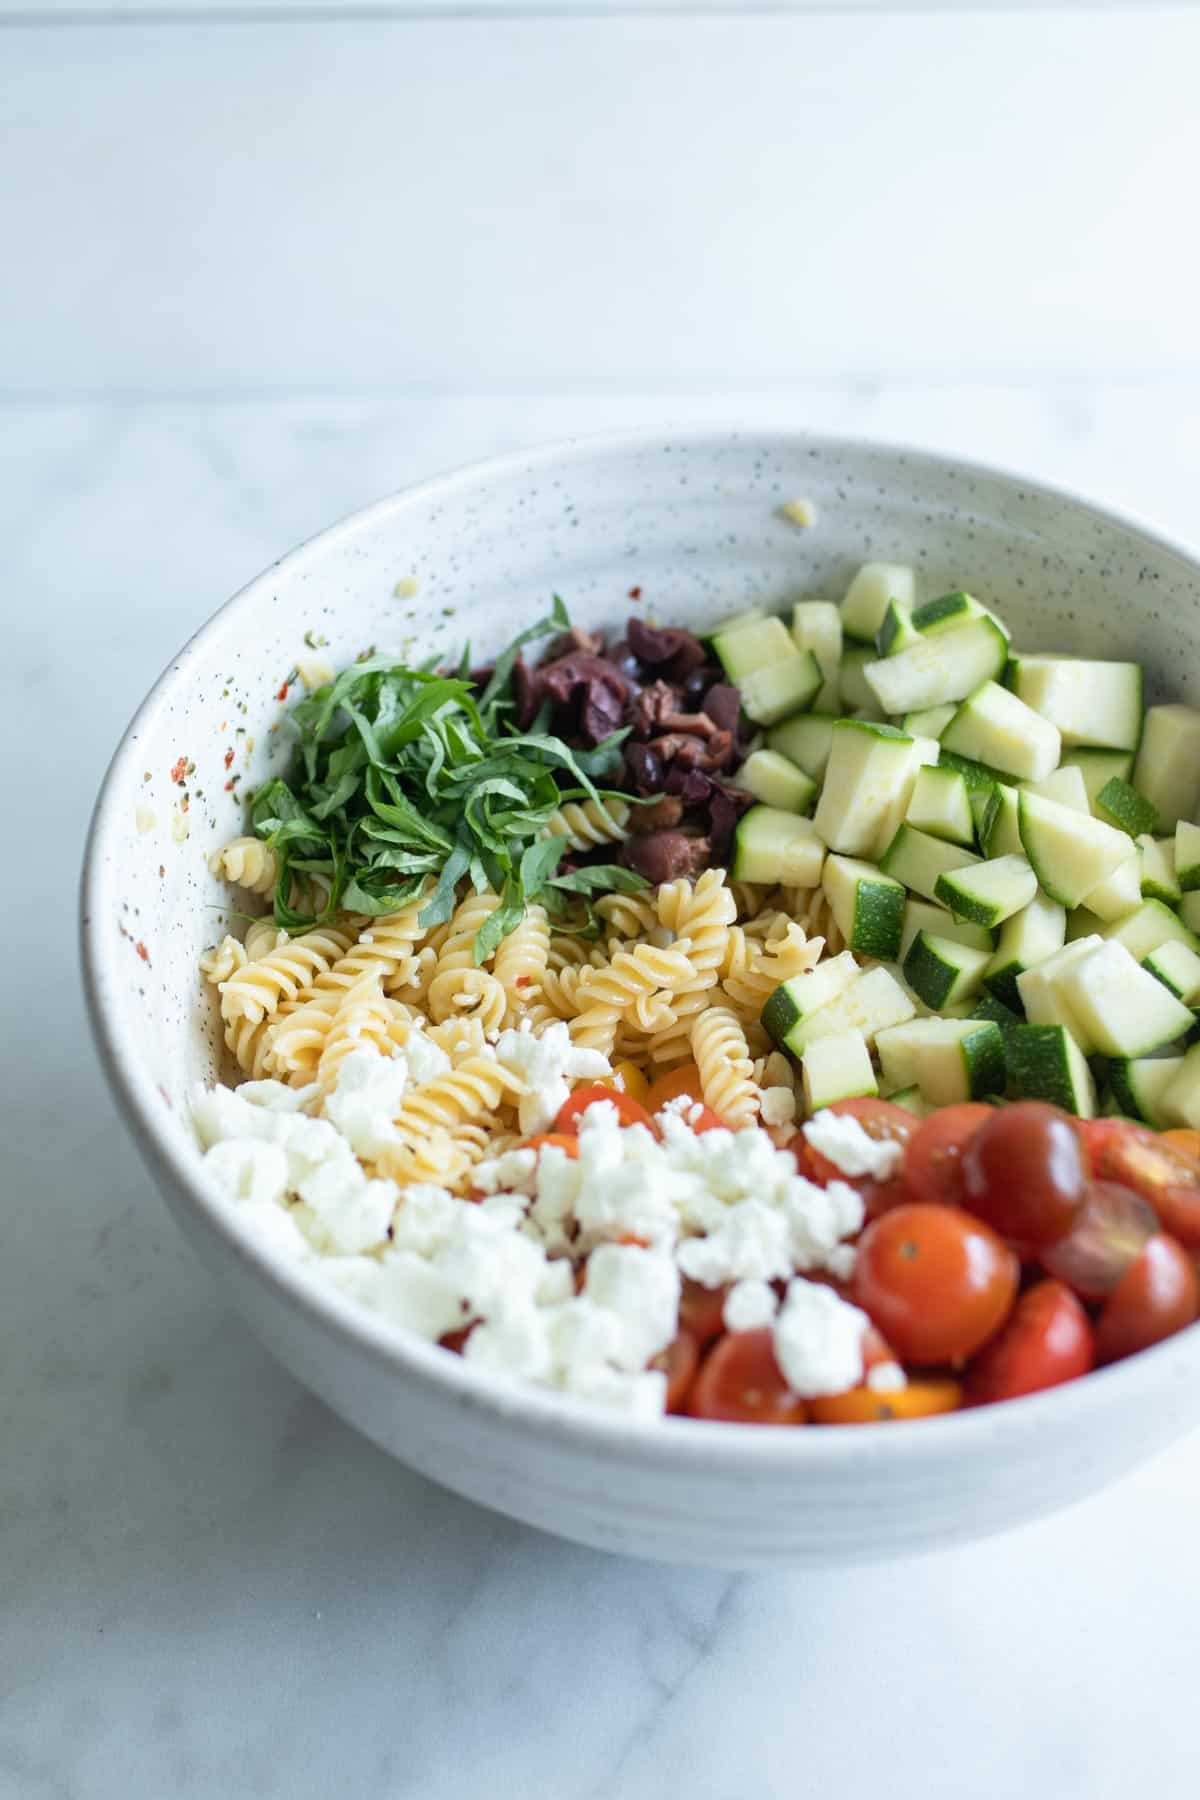 Pasta, goat cheese, tomatoes, basil, and zucchini in a bowl.